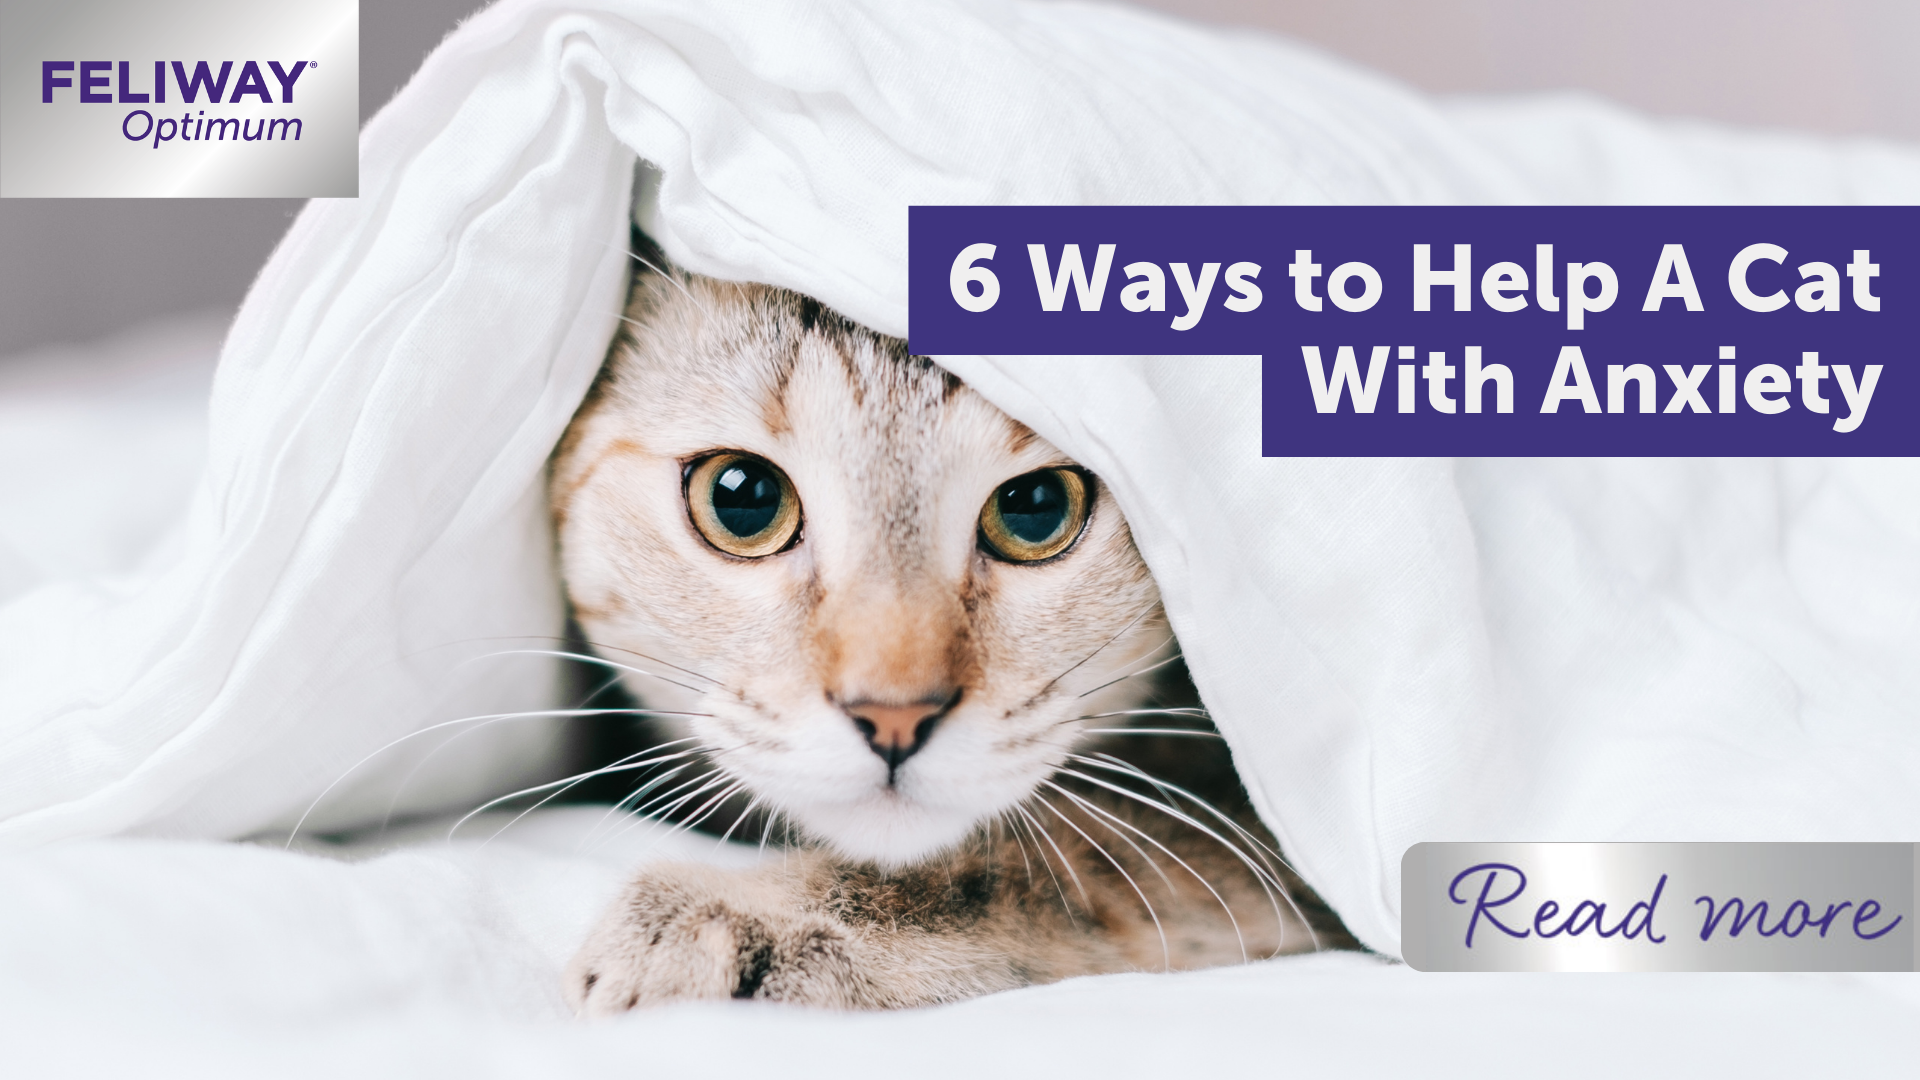 6 Ways to Help A Cat With Anxiety